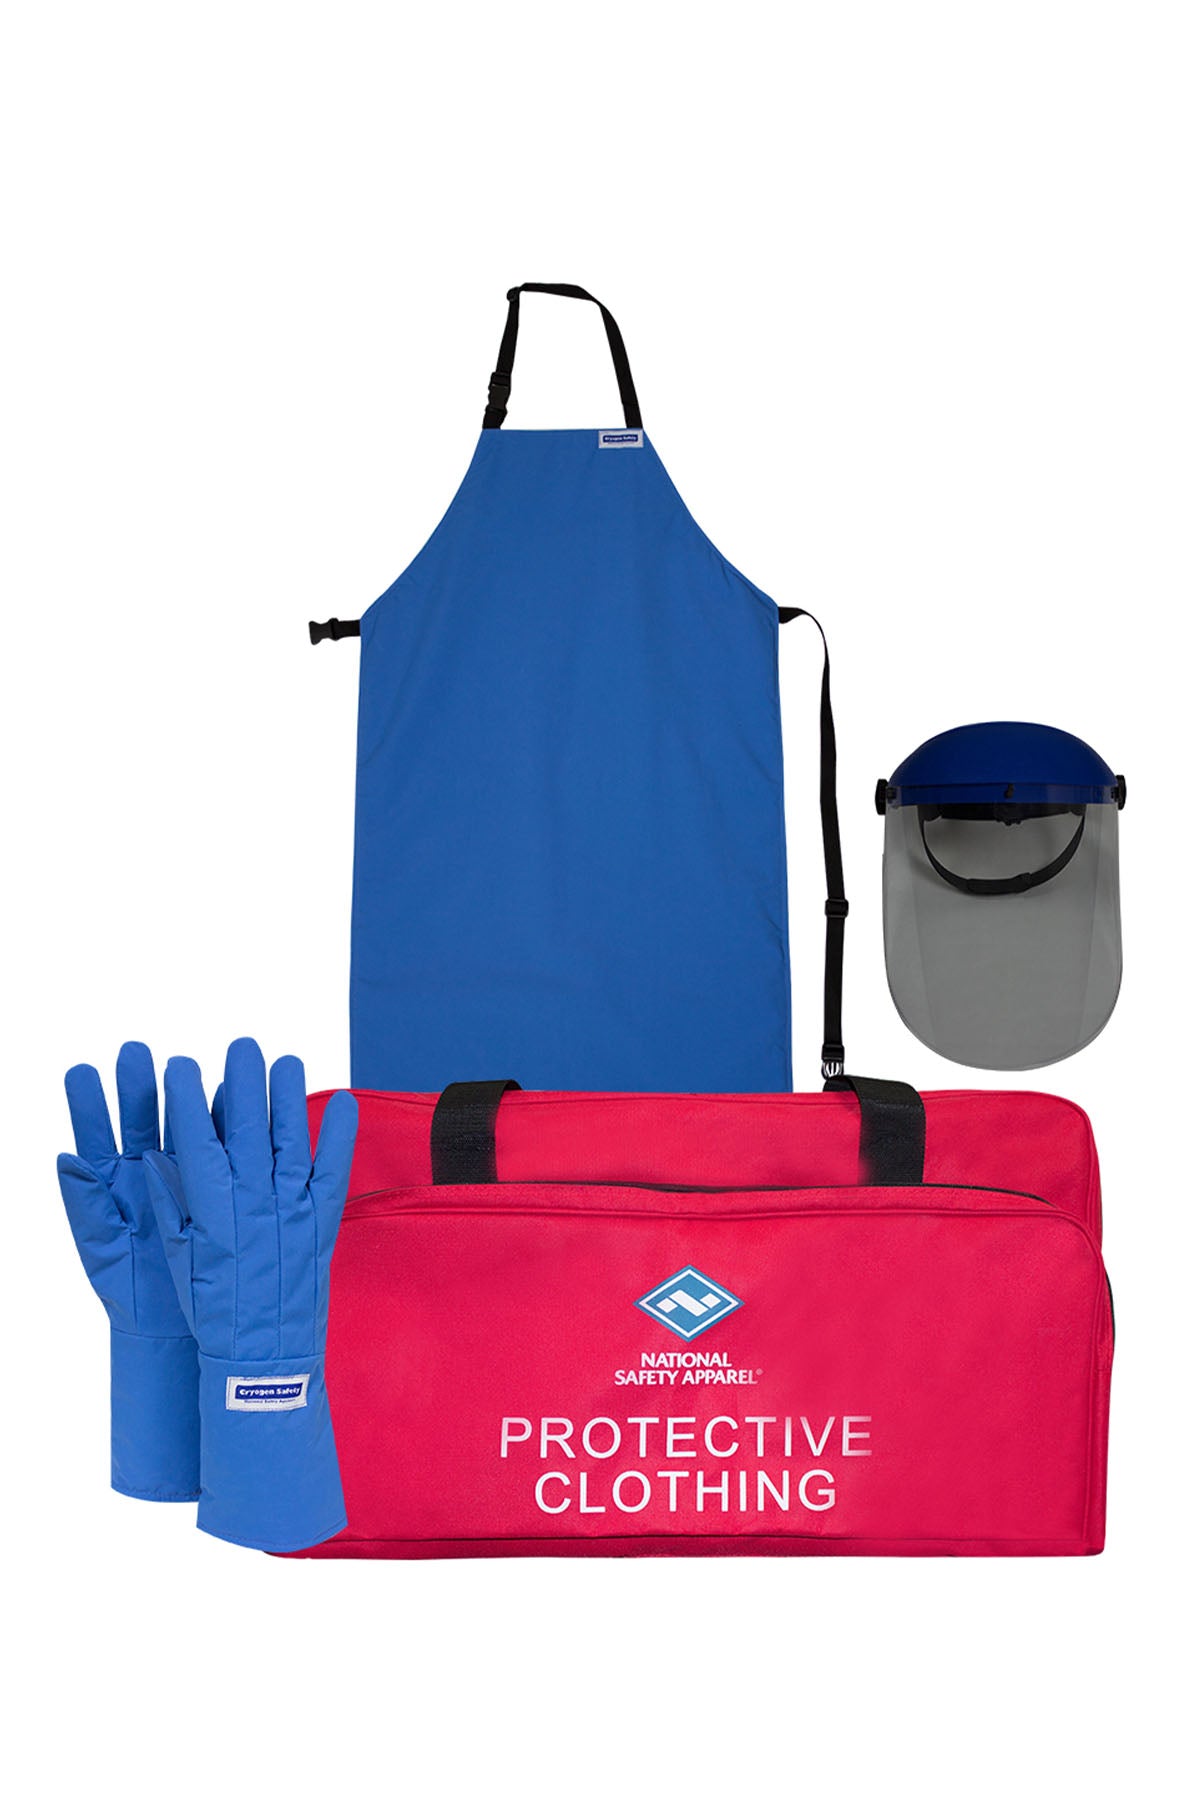 Water Resistant Mid-Arm Length Cryogenic Glove Kit